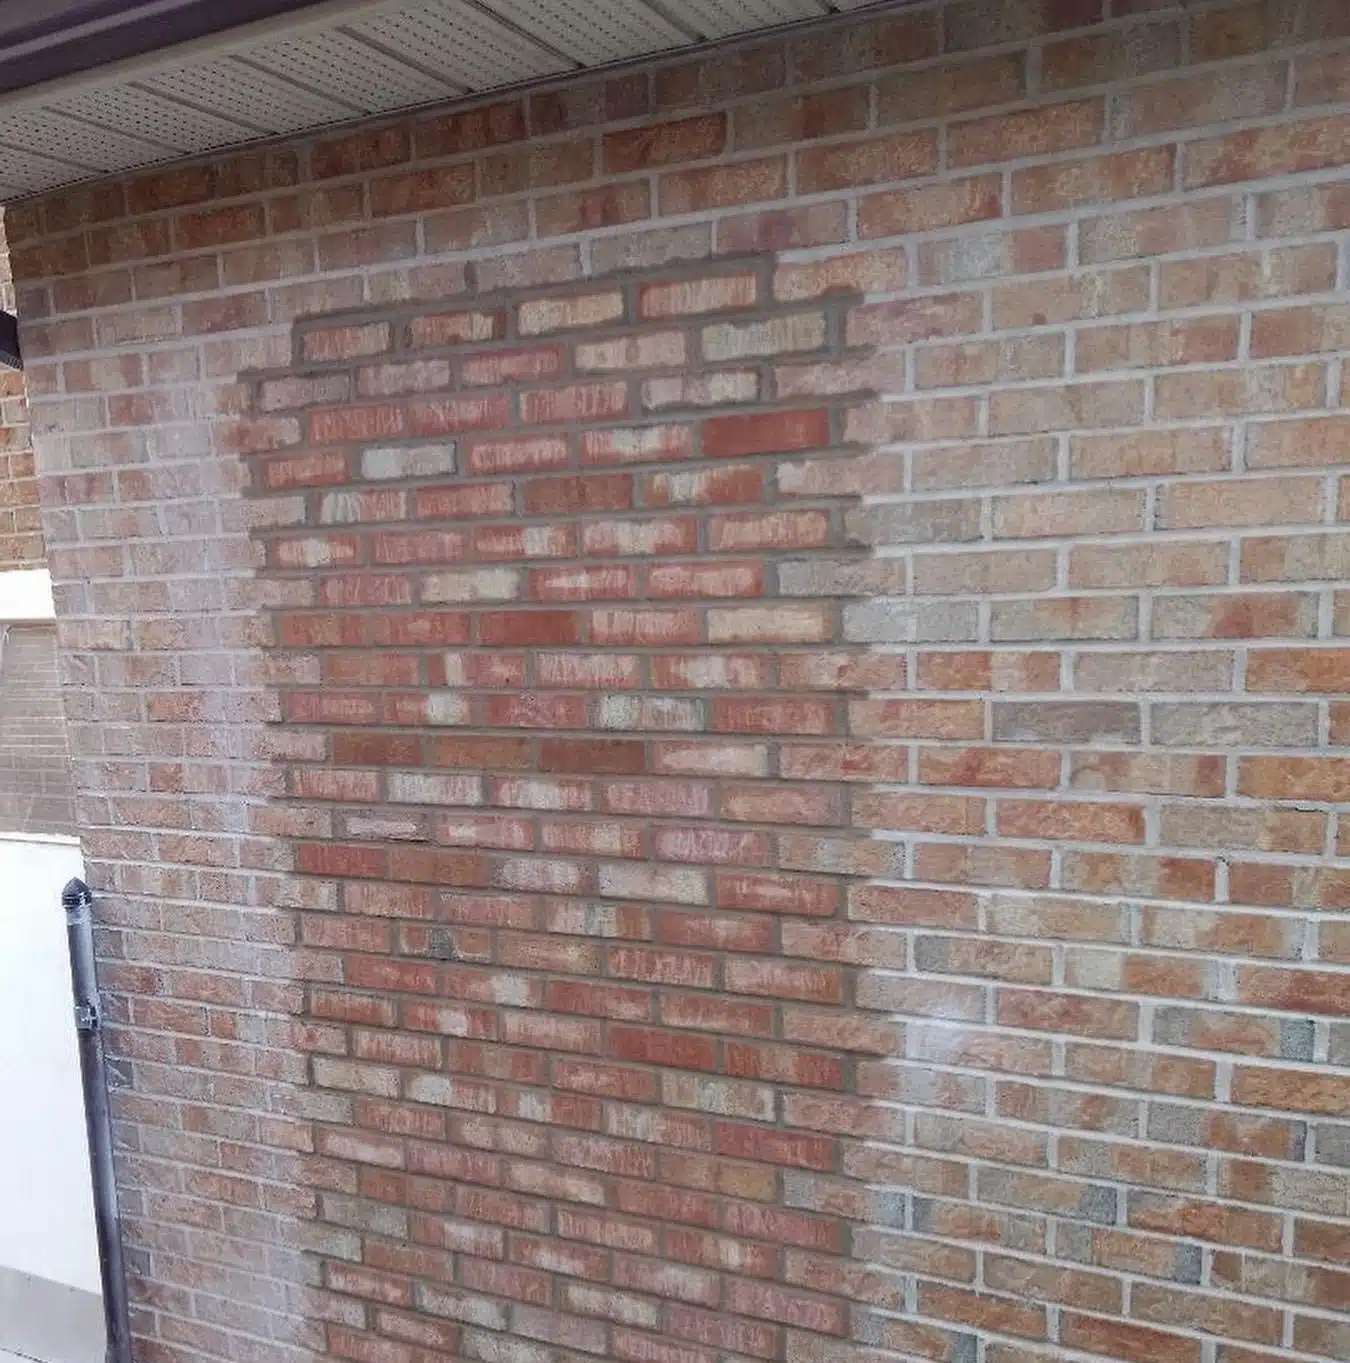 This image shows a brick wall The bricks are a mix of reddish-brown and light tan colors creating a textured and varied appearance The bricks are laid in a typical running bond pattern with some variation in the size and placement of the bricks The wall appears to be part of a building or structure and the image captures the detailed and intricate masonry work